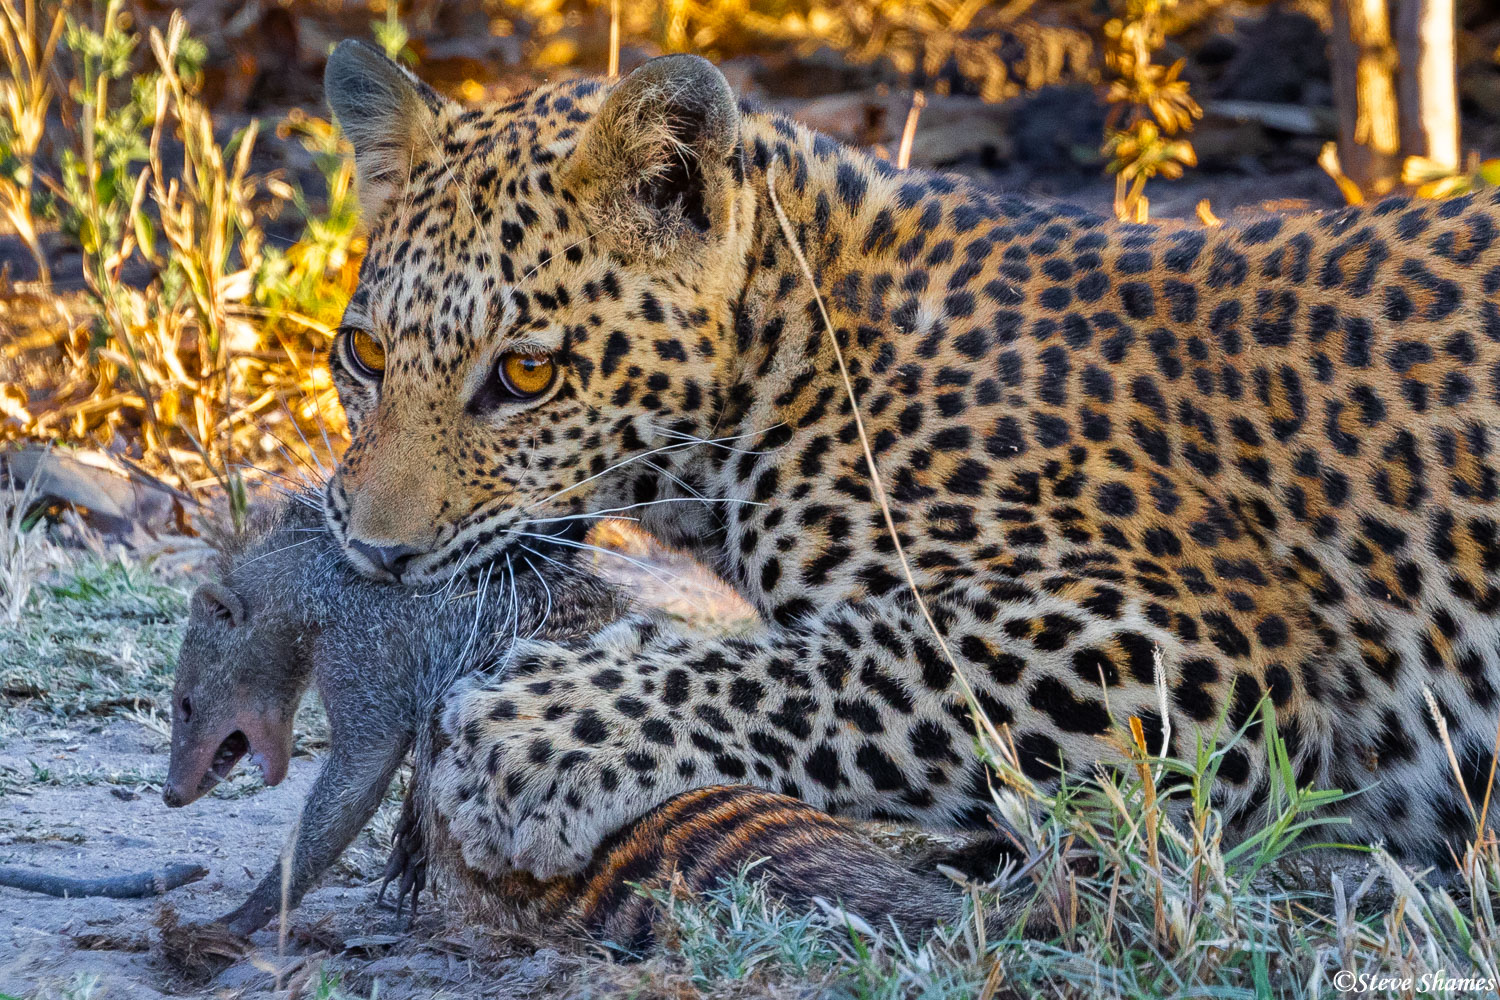 A leopard kill in Botswana. The victim is a mongoose.